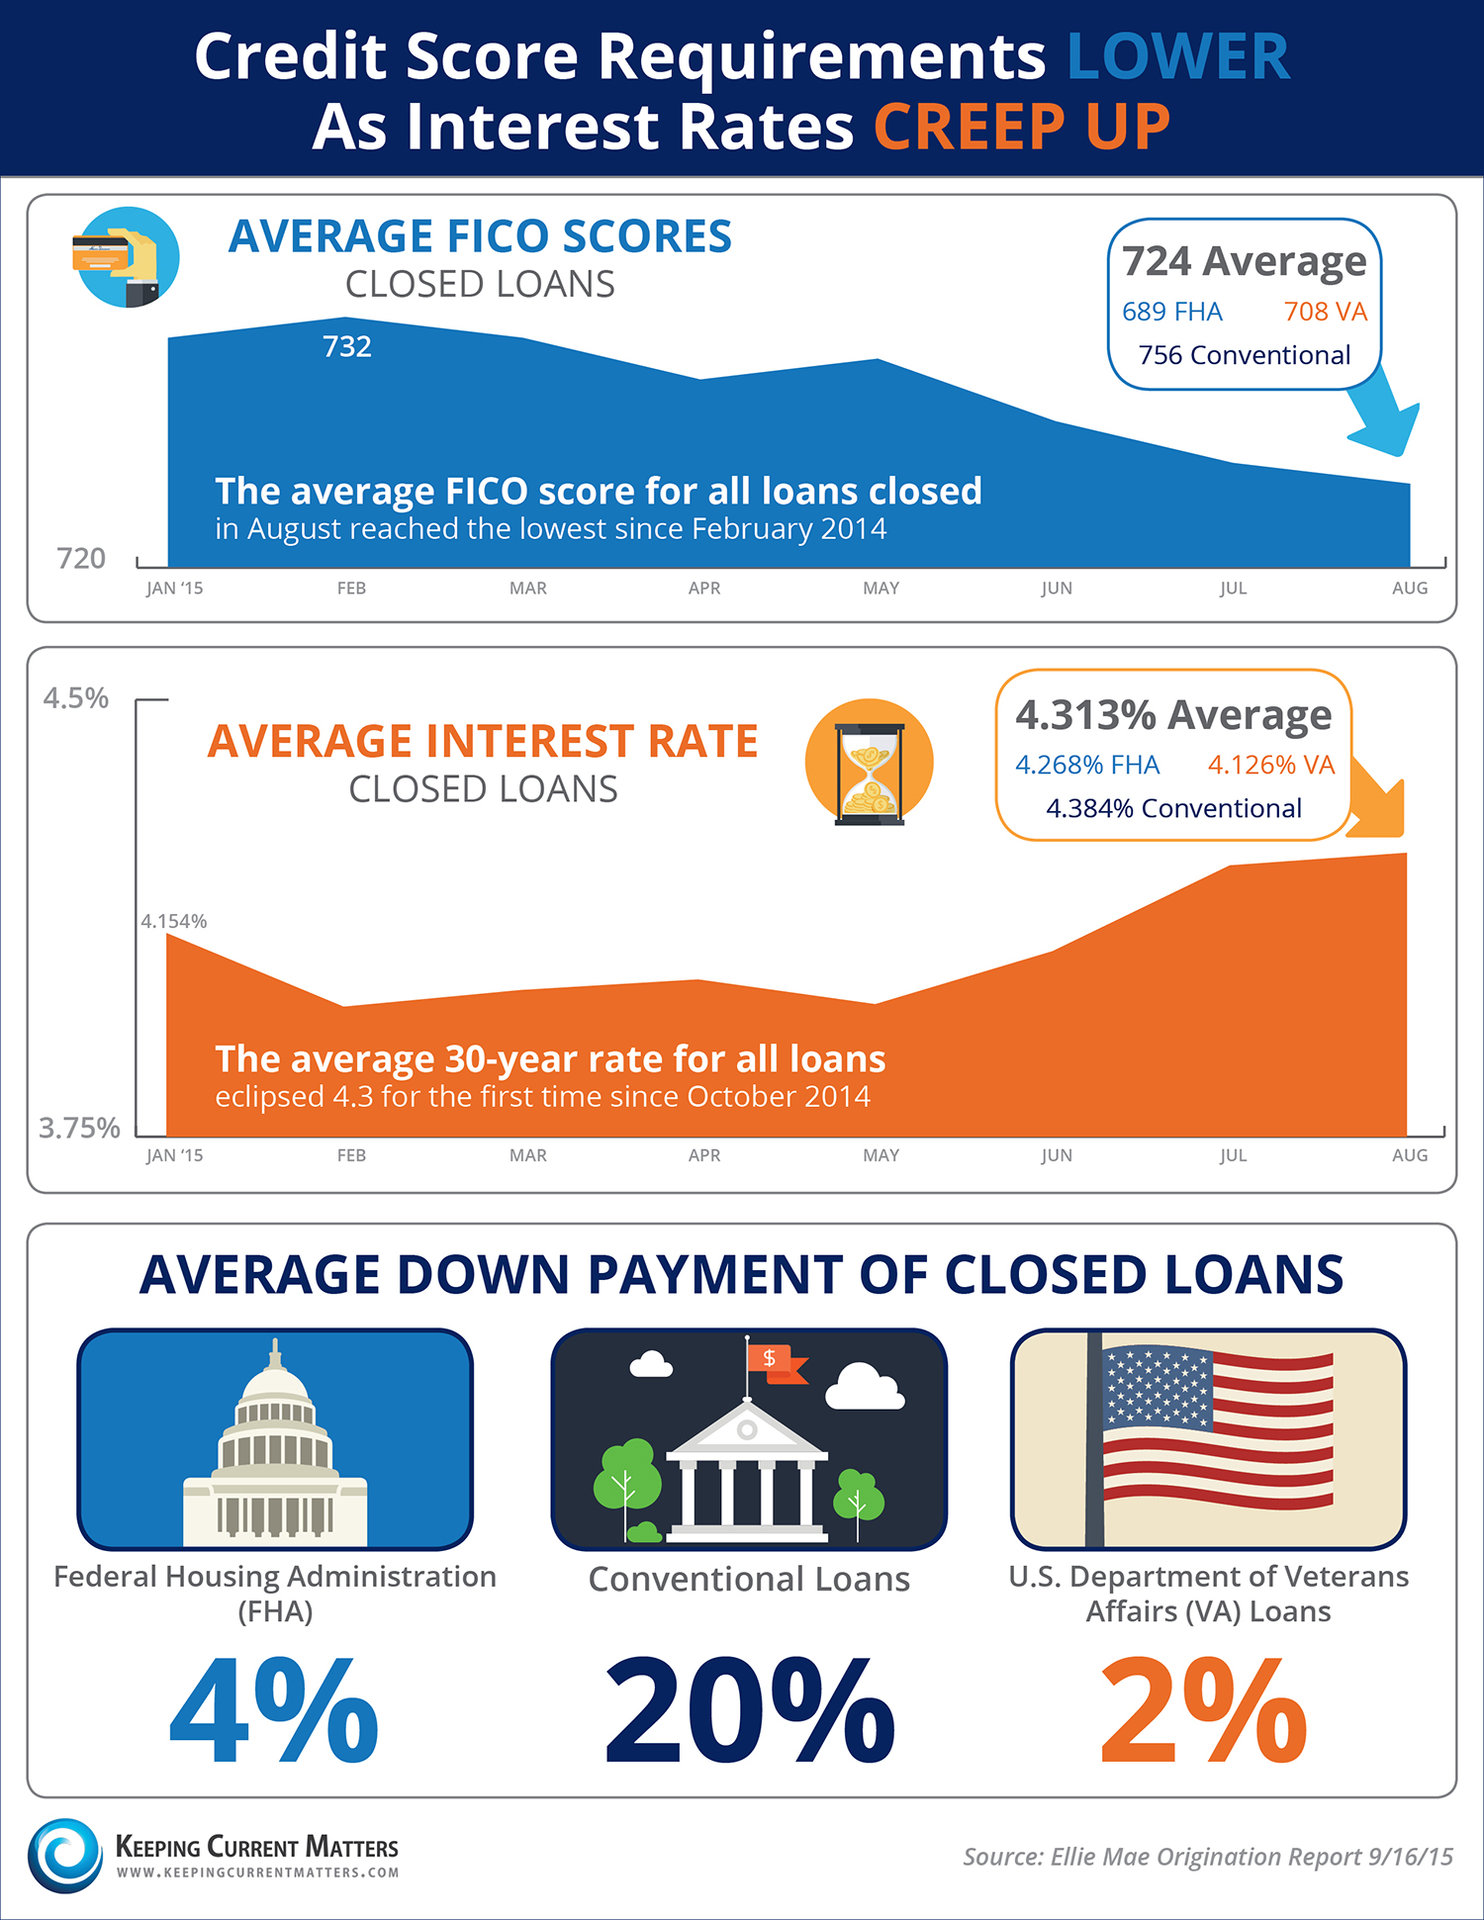 Credit Score Requirements LOWER As Interest Rates CREEP UP! [INFOGRAPHIC] | Keeping Current Matters